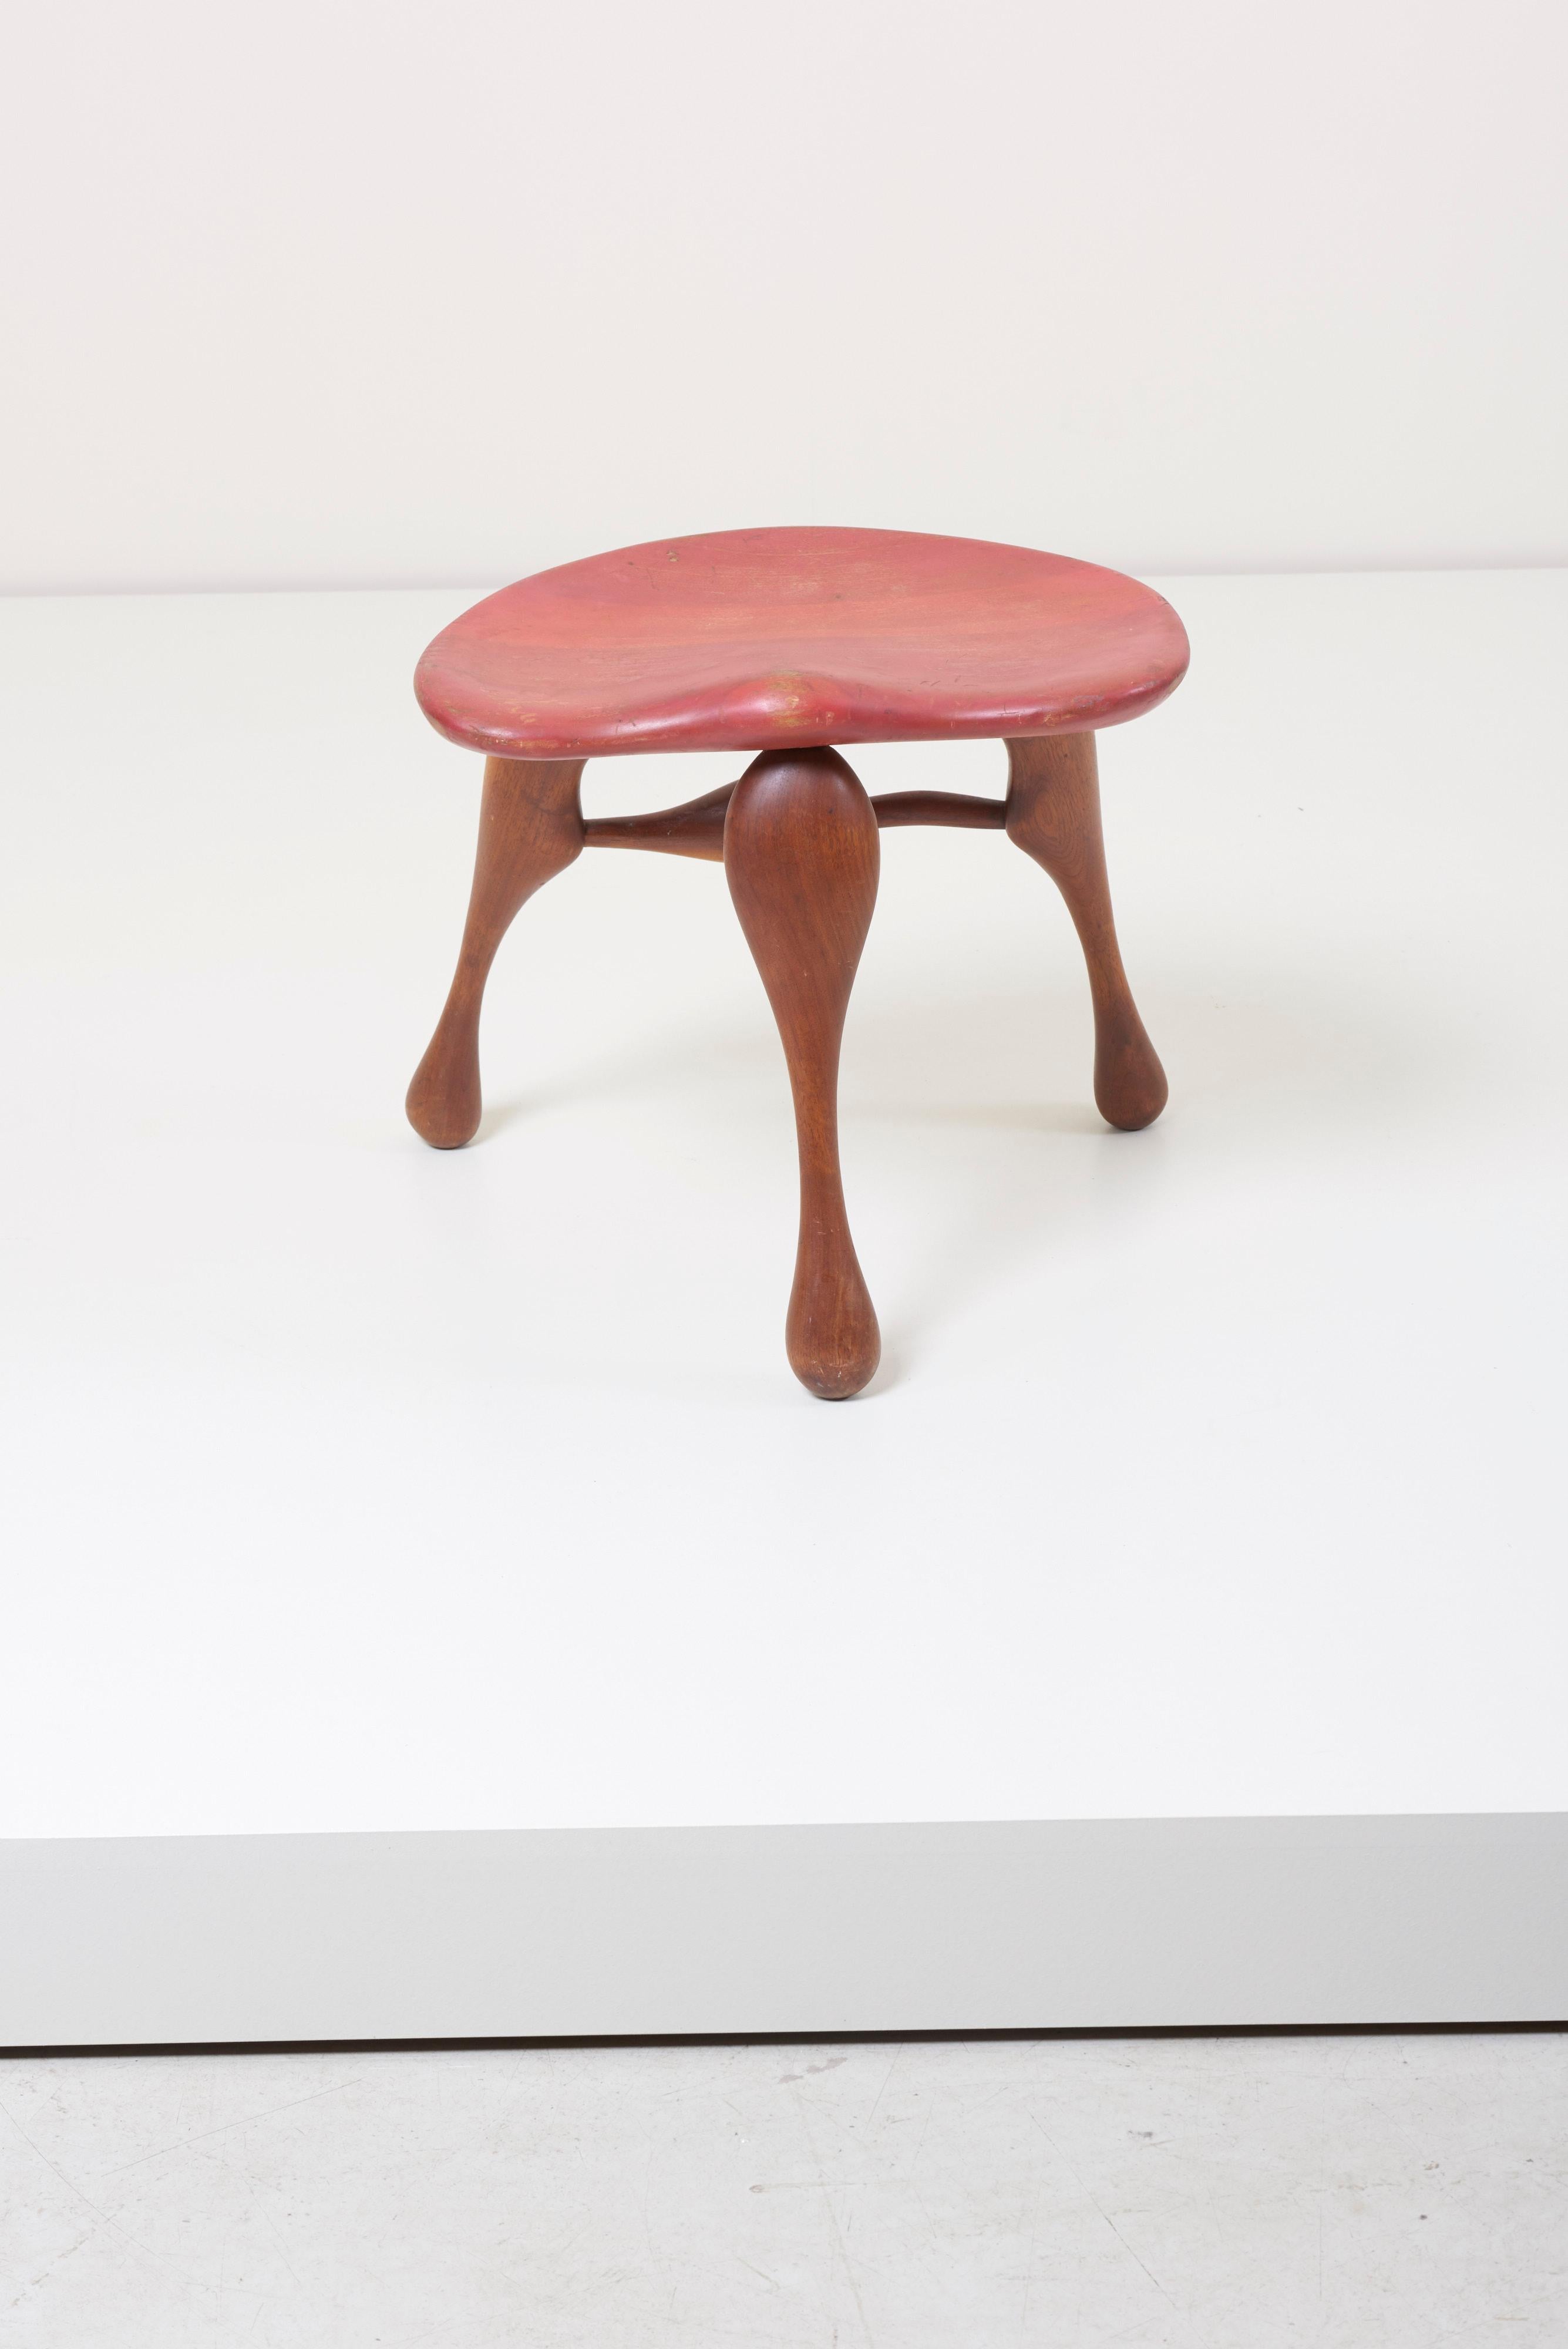 American Craftsman Studio Craft Wooden Stool by Ron Curtis, US, 1950s